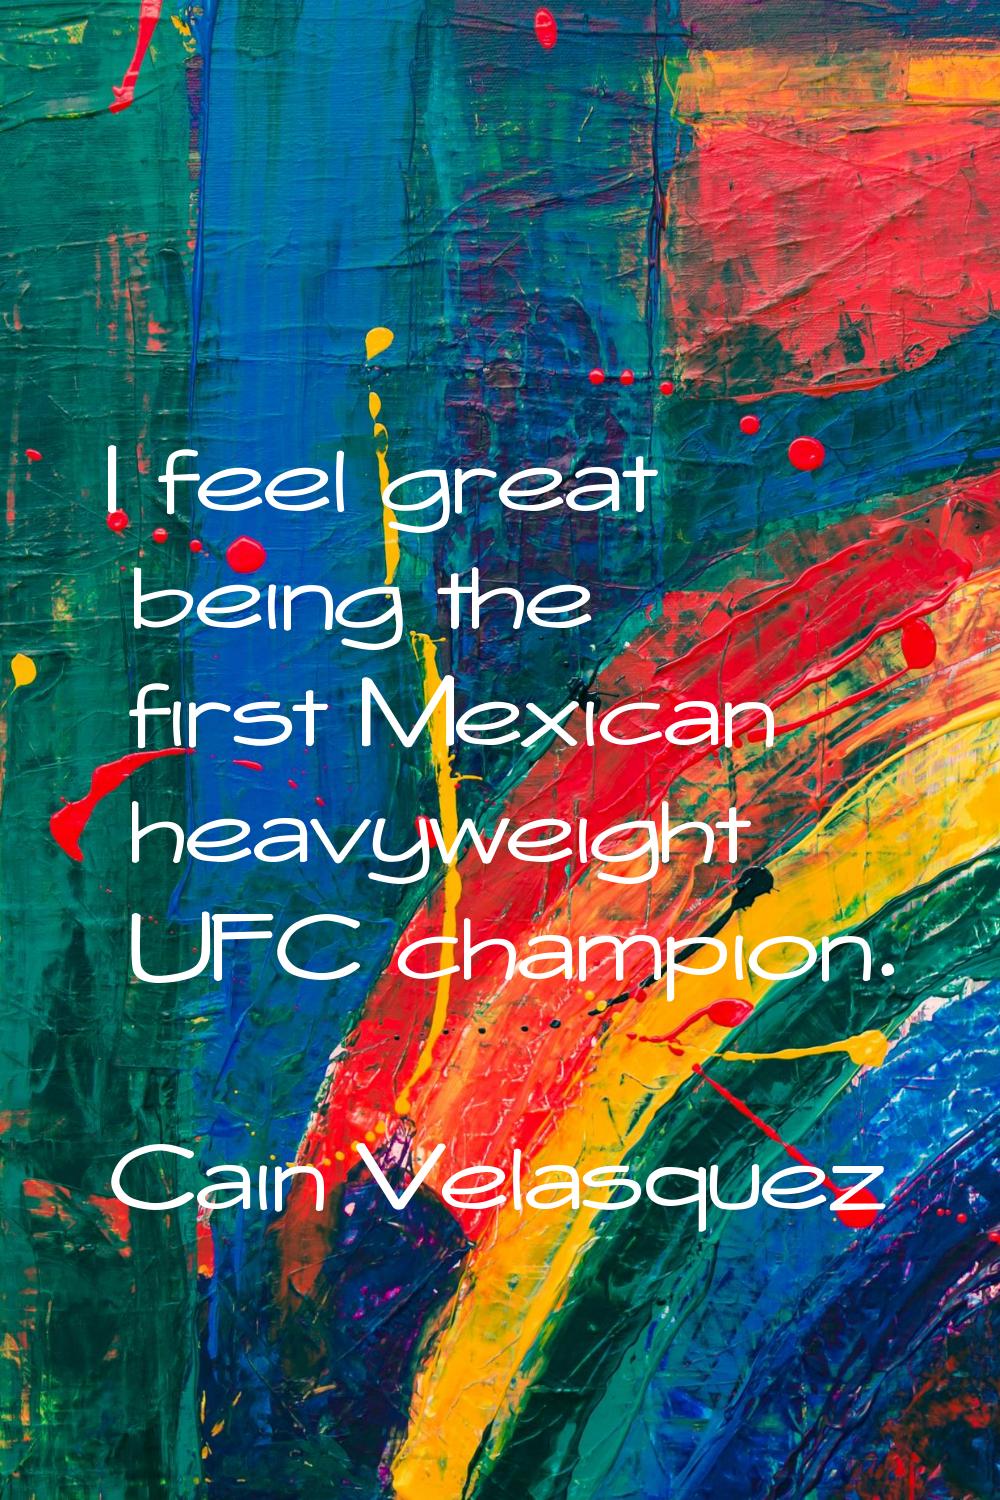 I feel great being the first Mexican heavyweight UFC champion.